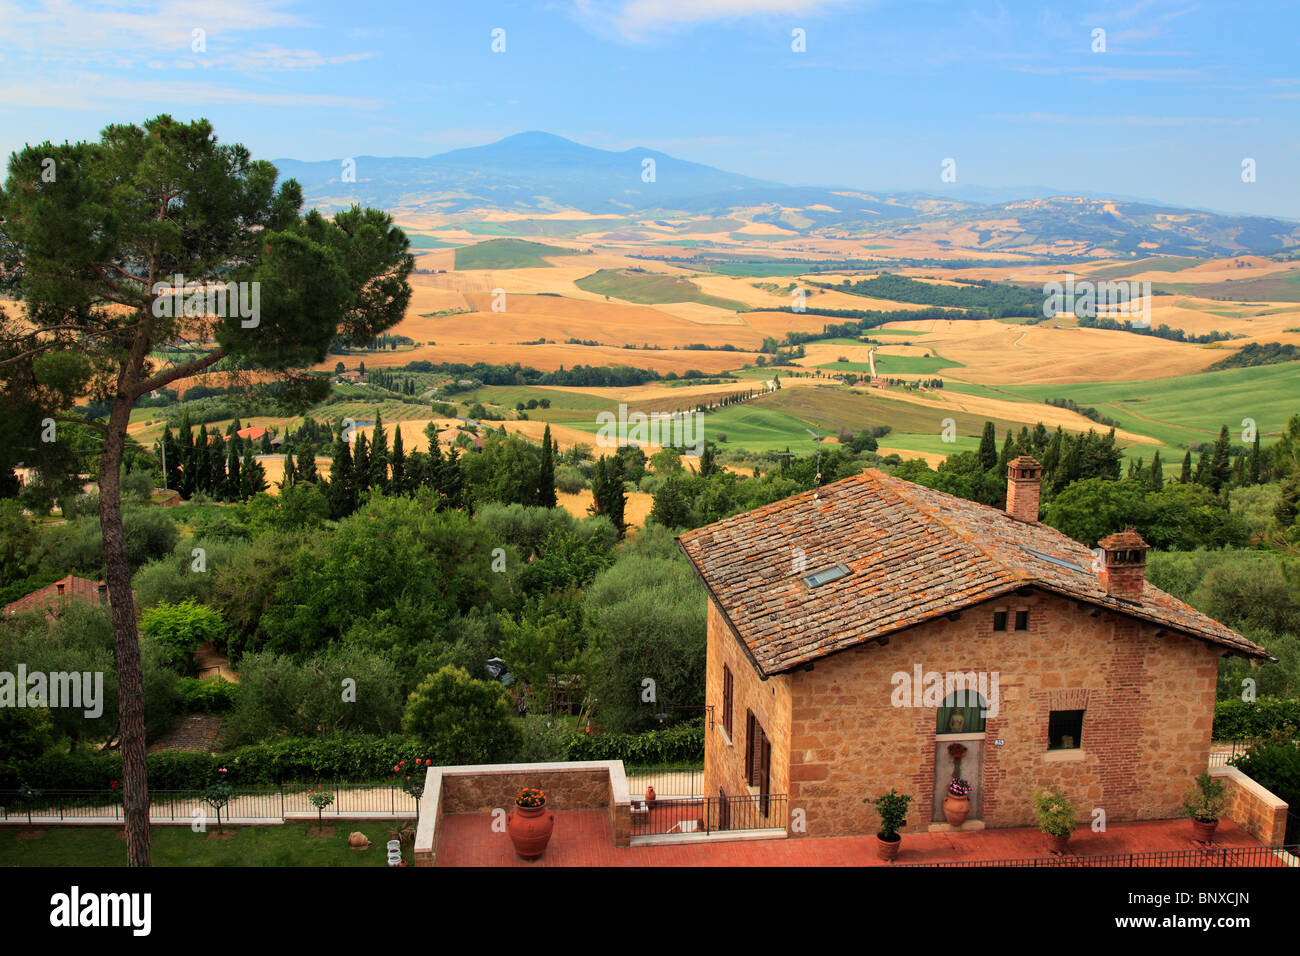 View of the surrounding Tuscan landscape from the hill town of Pienza, Italy Stock Photo